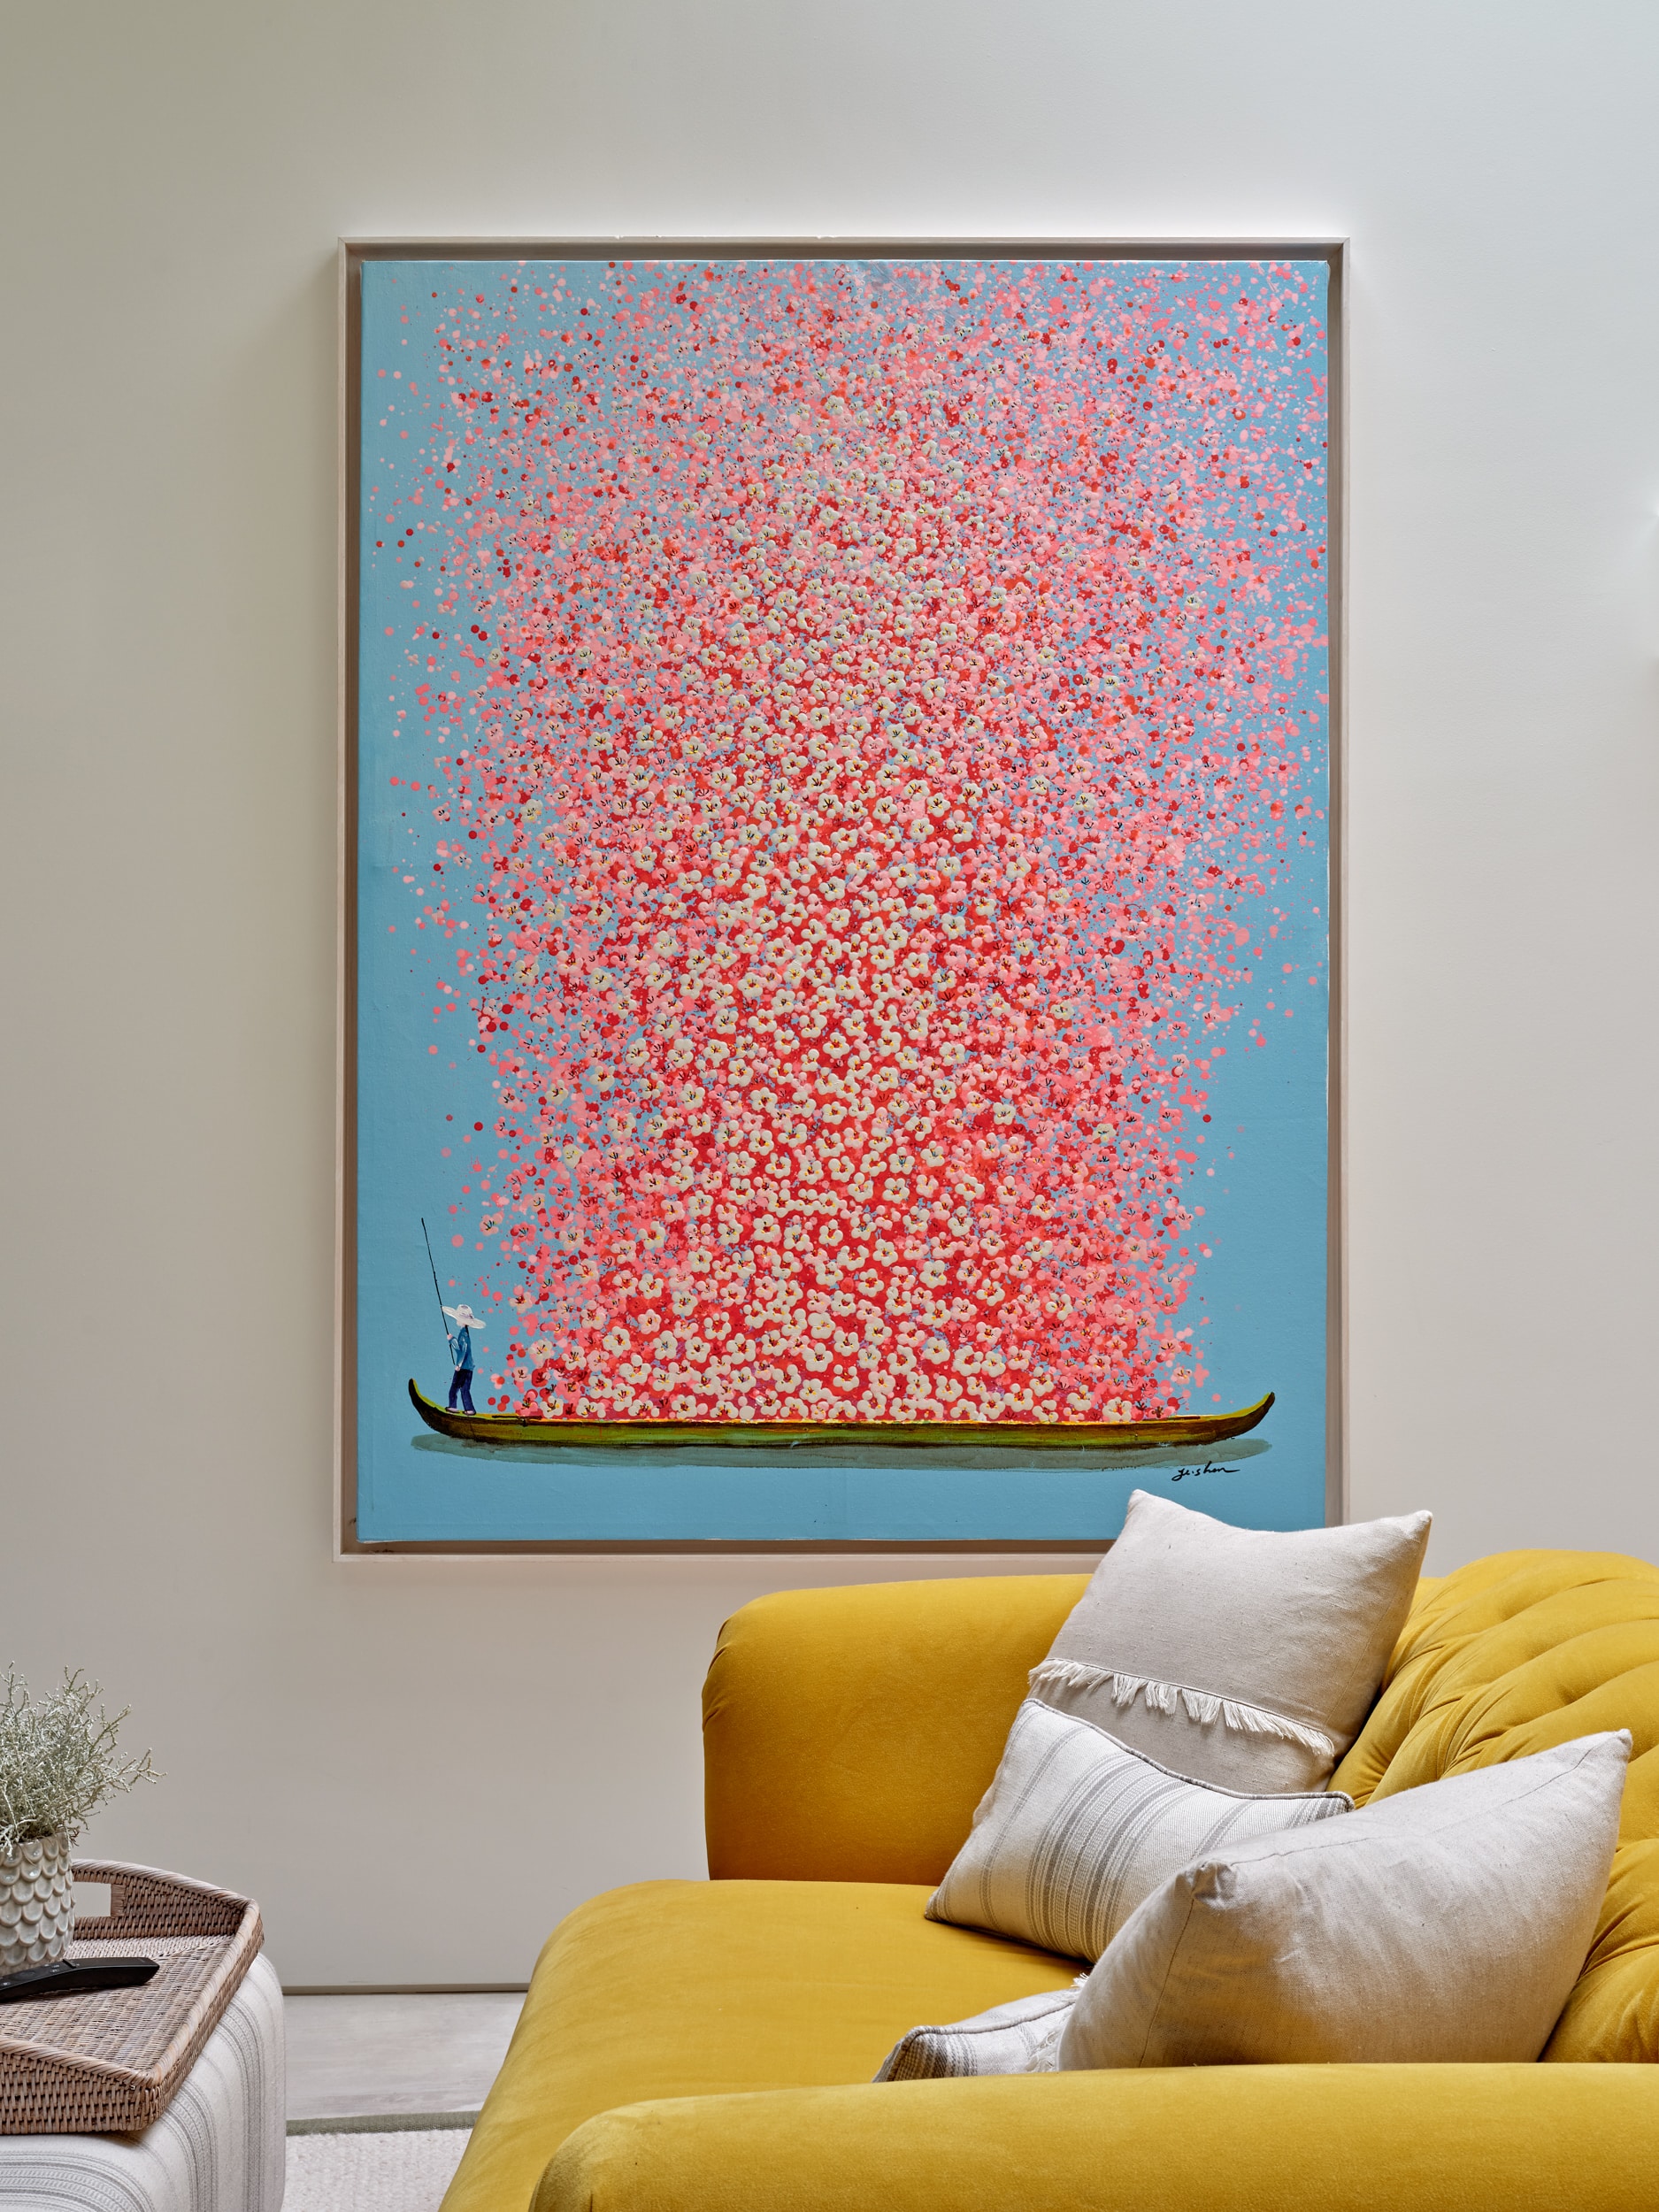 Beautiful colourful painting of cherry blossoms in living space.